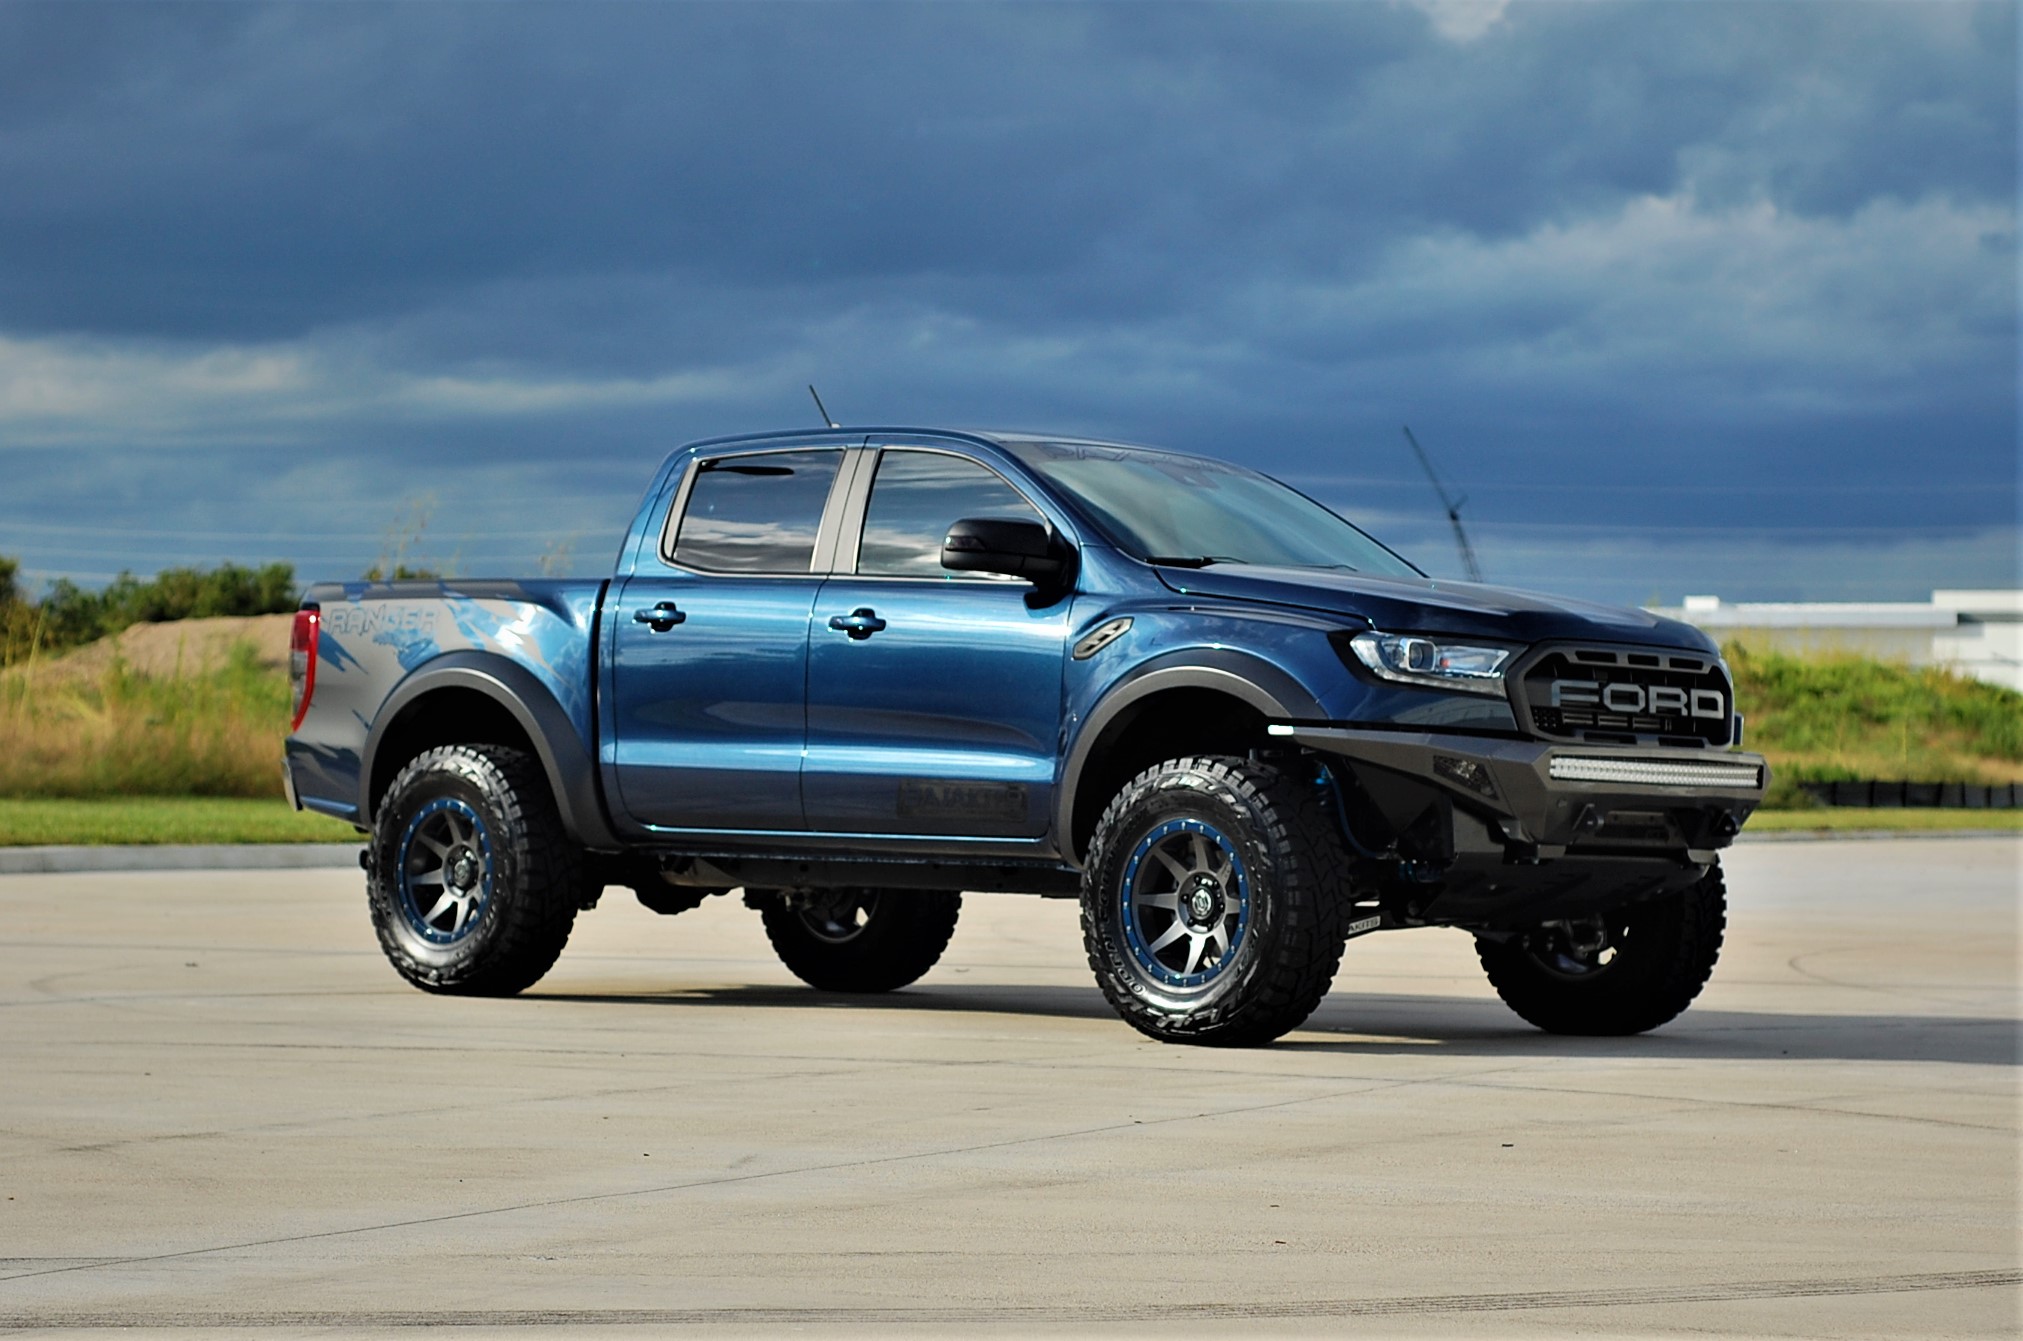 Ford Ranger Raptor Replica By Paxpower Unveiled At Sema 2019 Autoblog